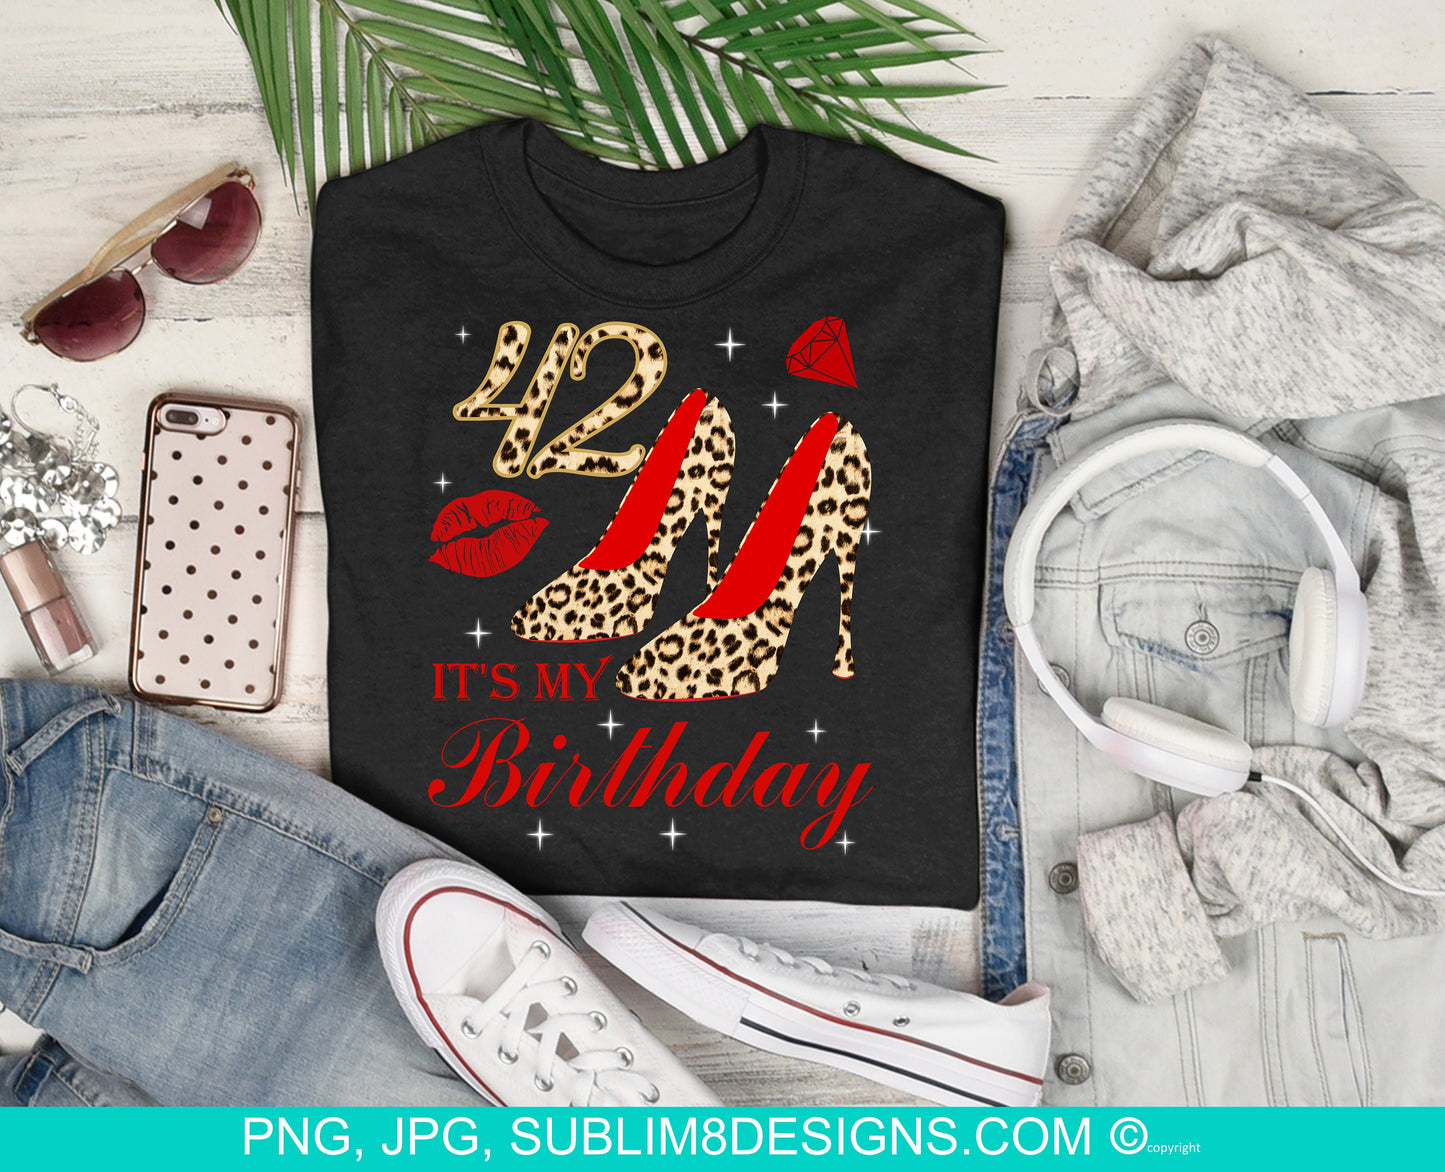 It's My Birthday High Heals Diamonds Lipstick T-shirt Sumblimation Design PNG and JPEG ONLY